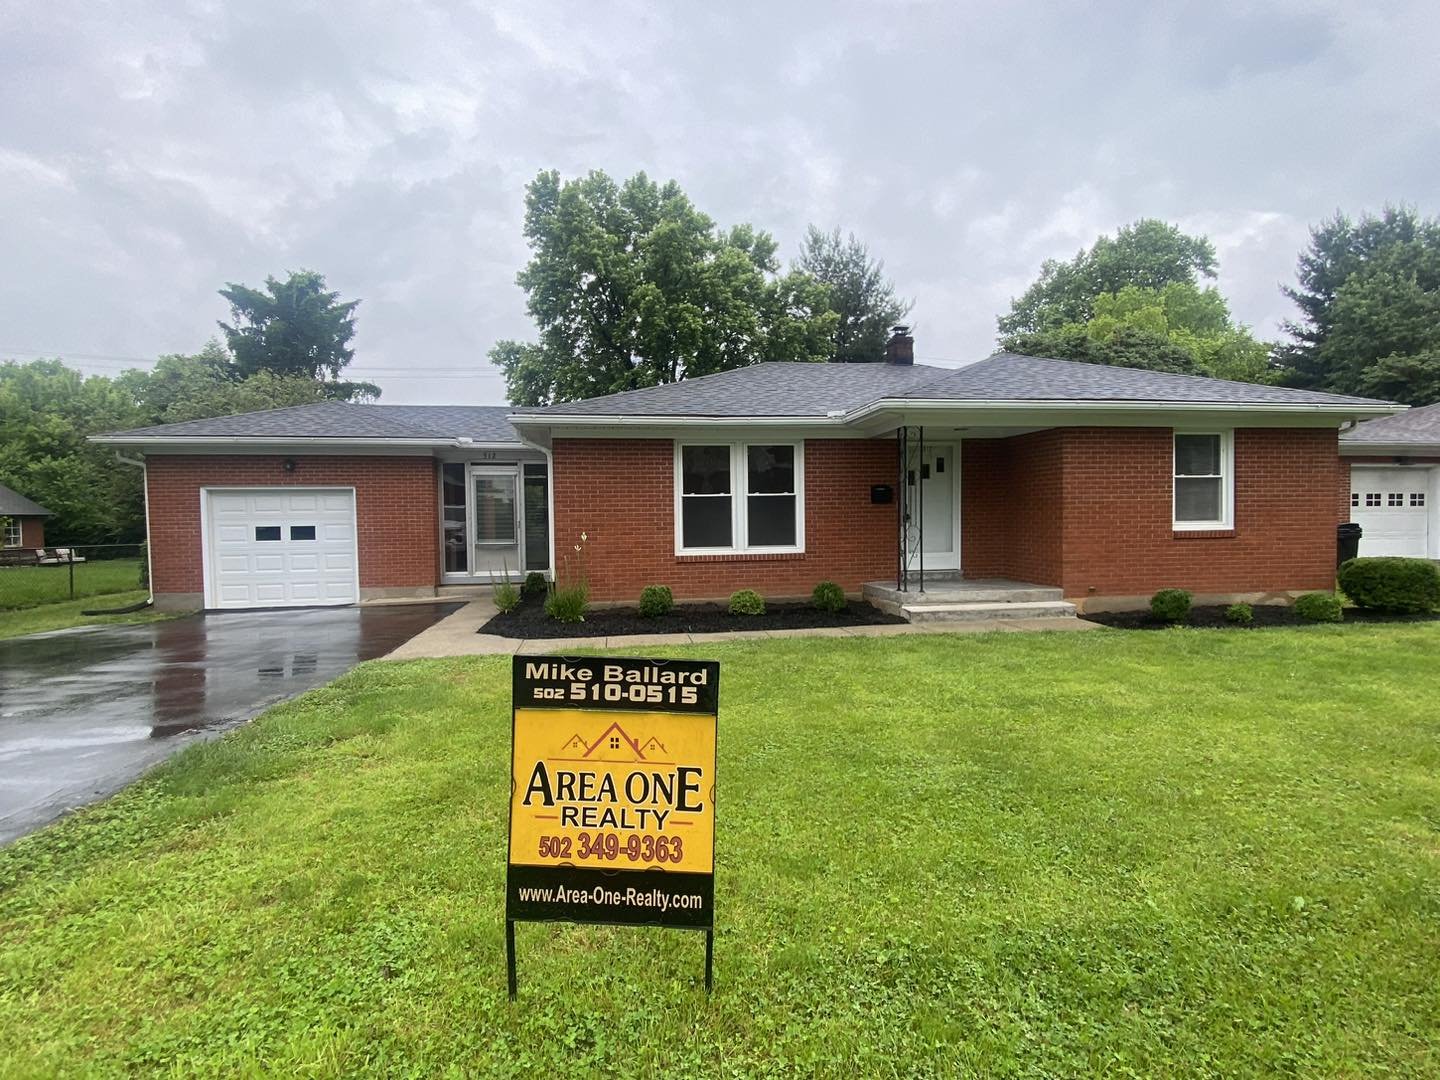 ‼️🚨🏡 NEW LISTING ALERT ‼️ 🏡🚨‼️
Check out Area One Realty&rsquo;s GREAT NEW LISTING at 312 S Sixth Street conveniently located in the downtown area of historic Bardstown, Ky offered by Mike &amp; Kathy Ballard. 

Two bedroom brick ranch with full 